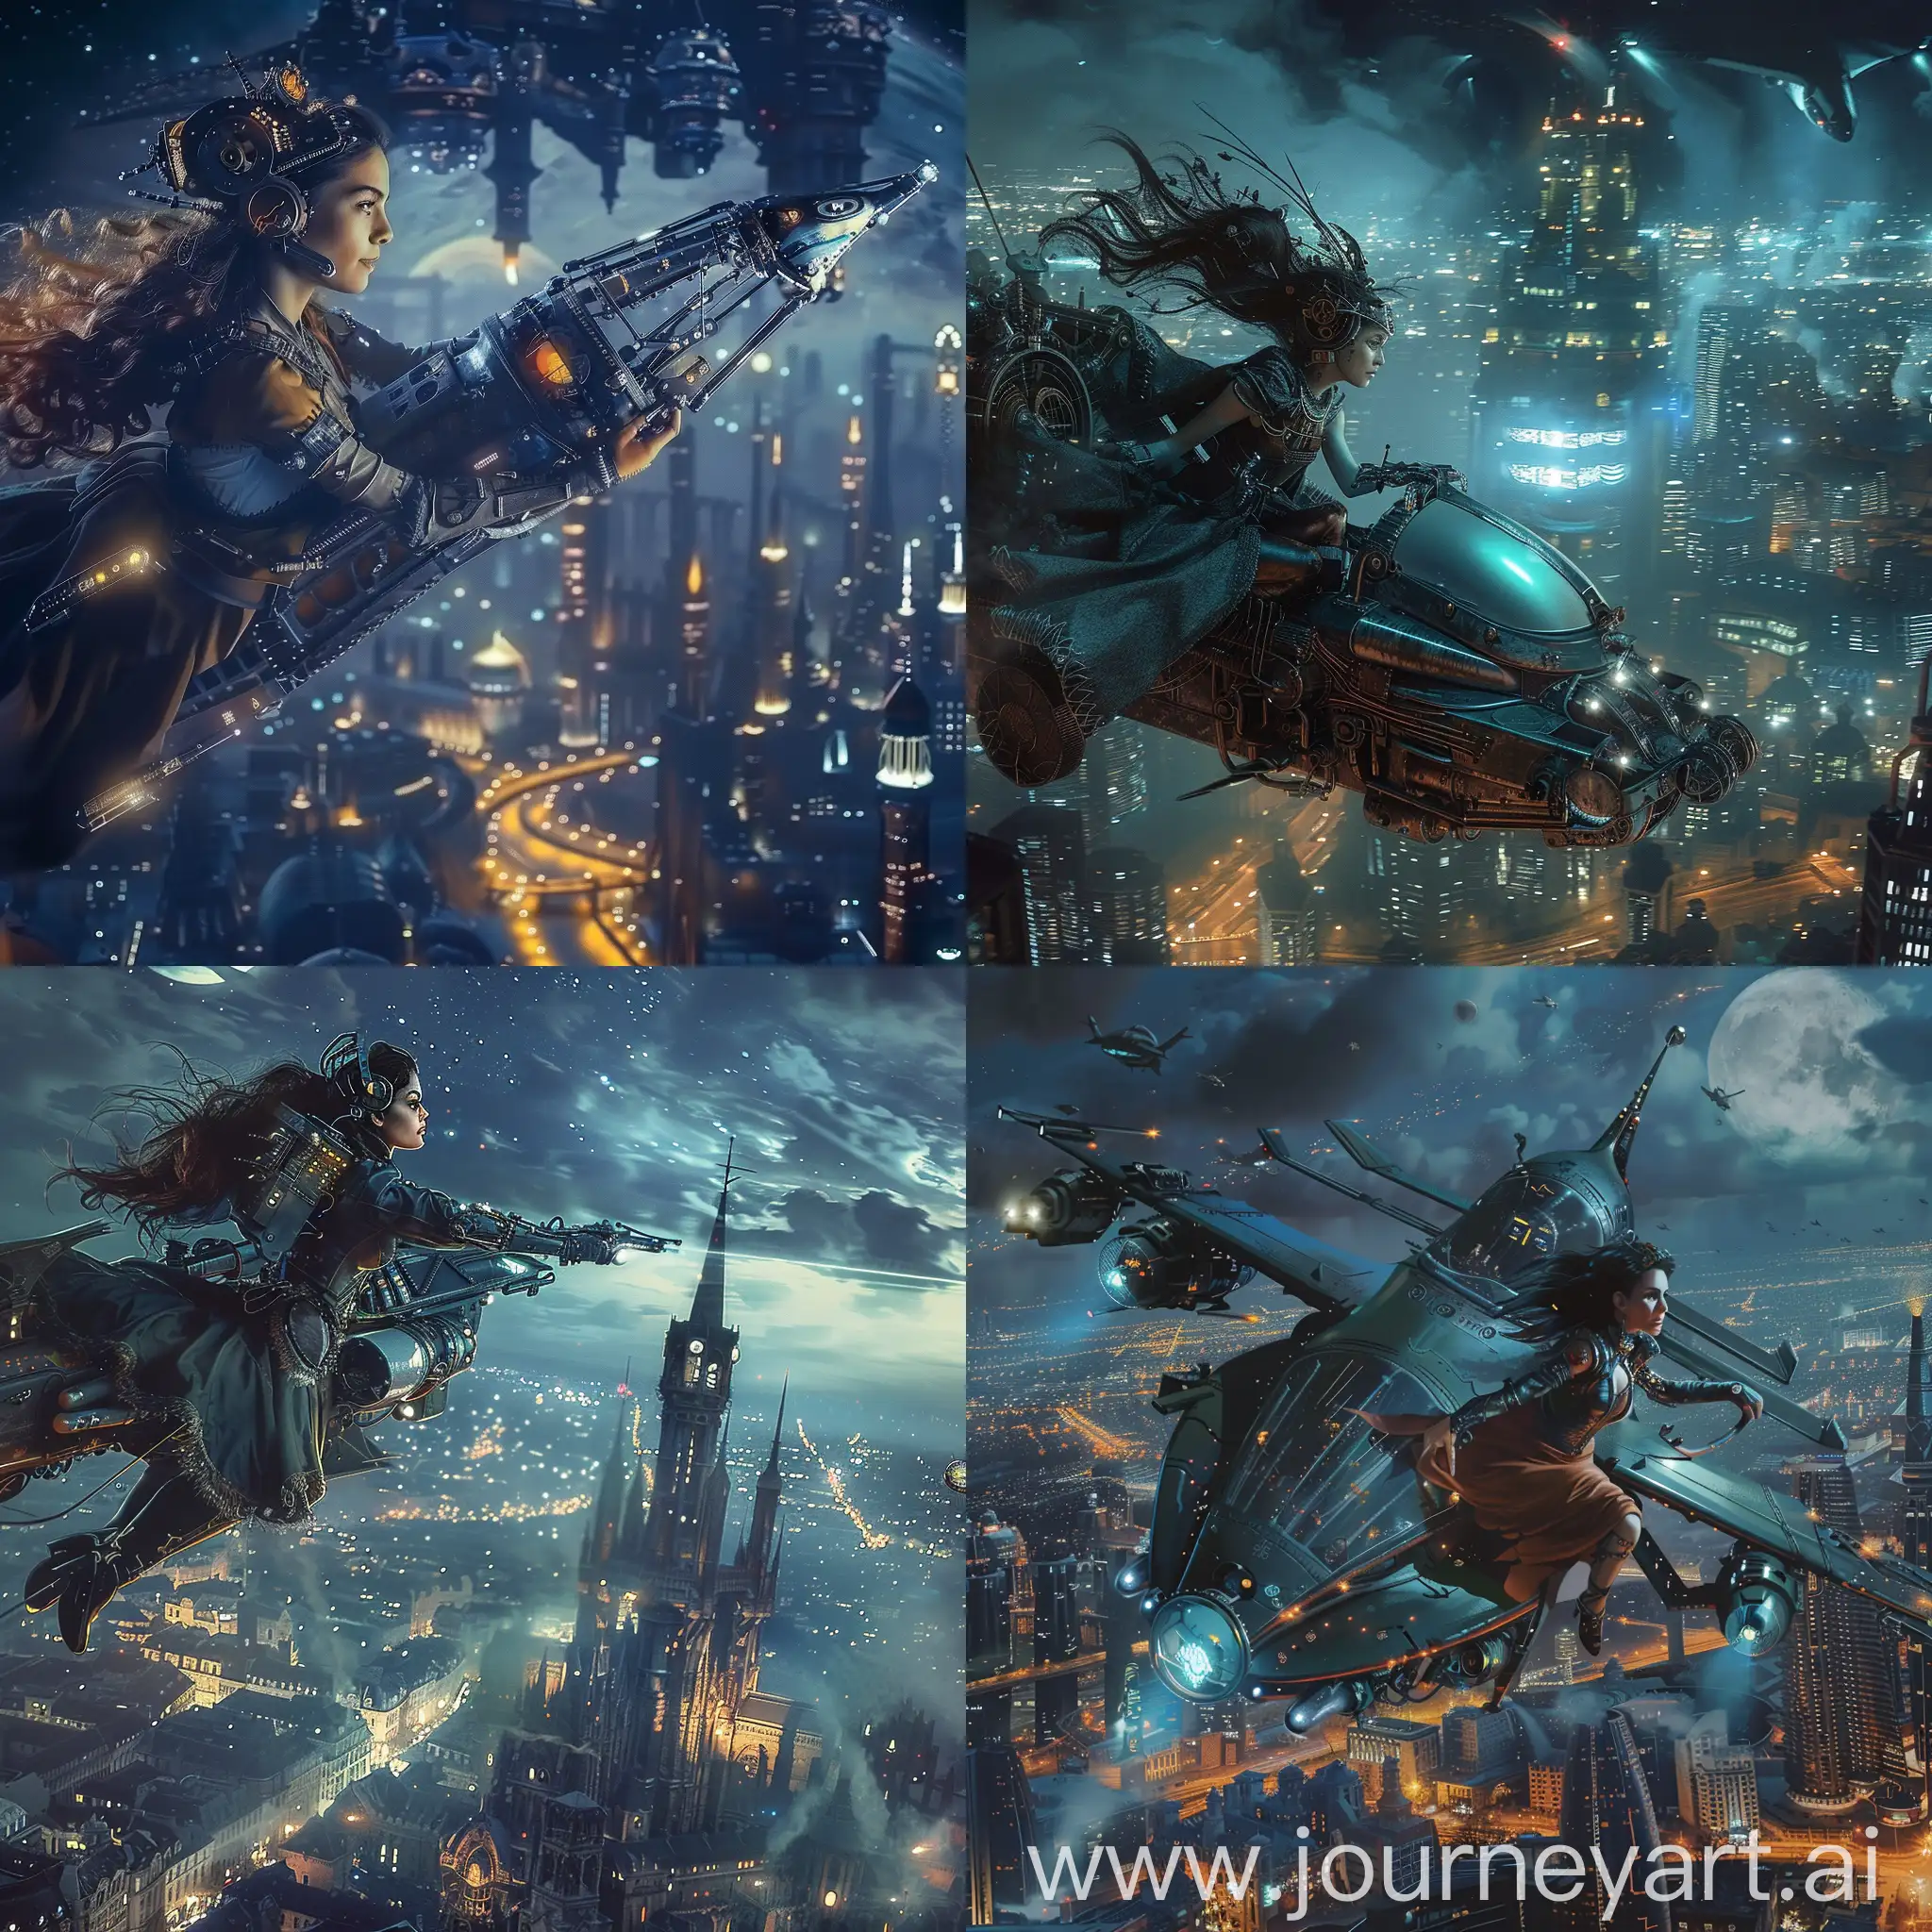 A beautiful medieval steampunk cyborg woman flying a space ship over a futuristic sci fi city at nighttime 